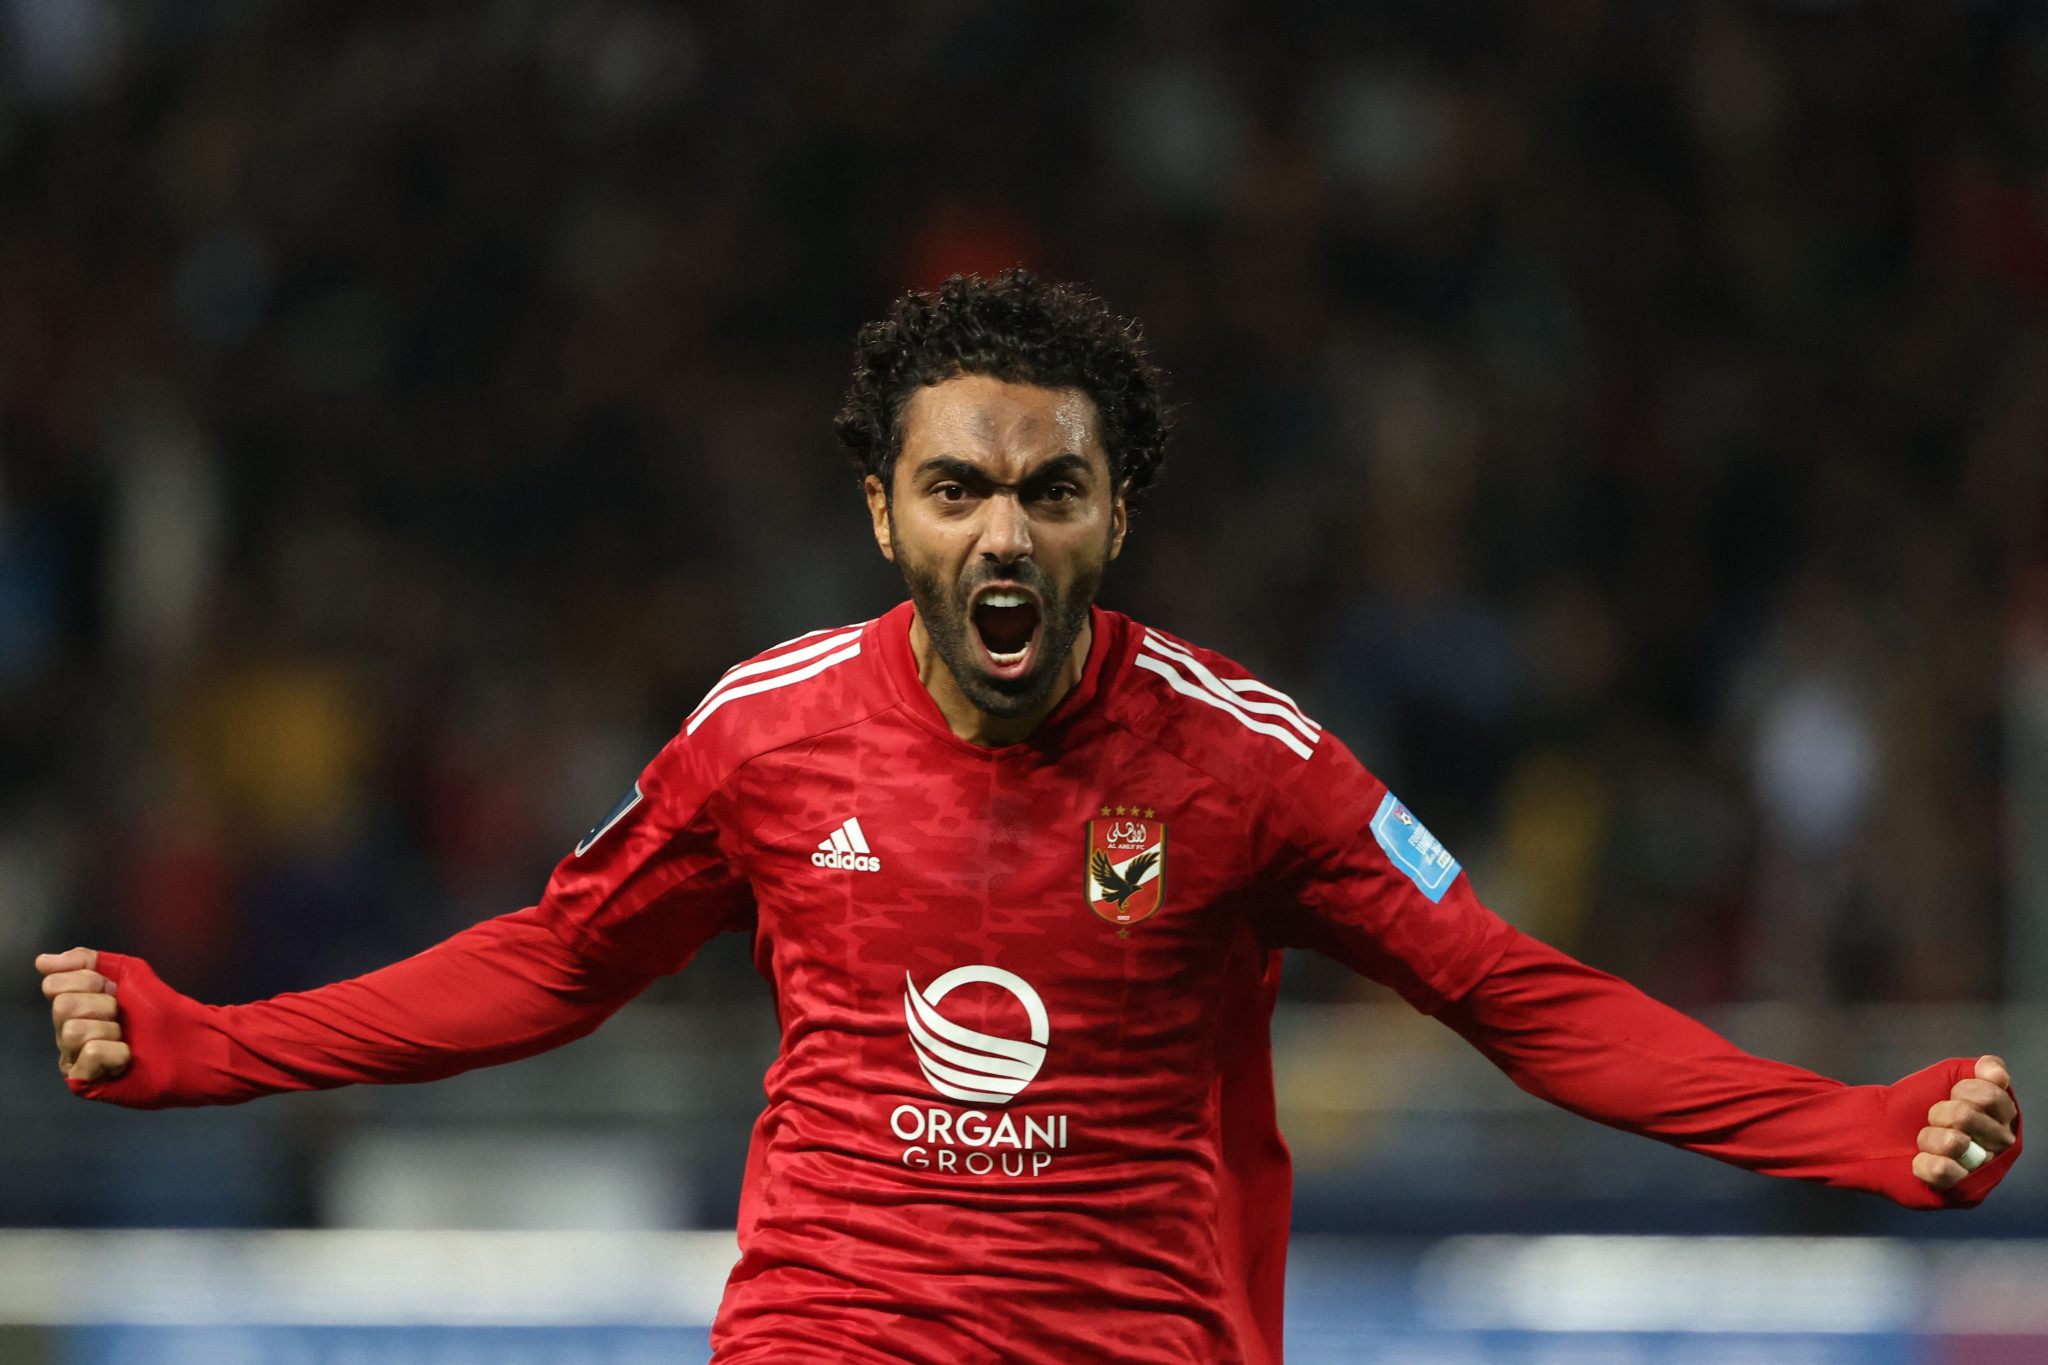 Al-Ahly shrug off Auckland City to take first win of FIFA Club World Cup